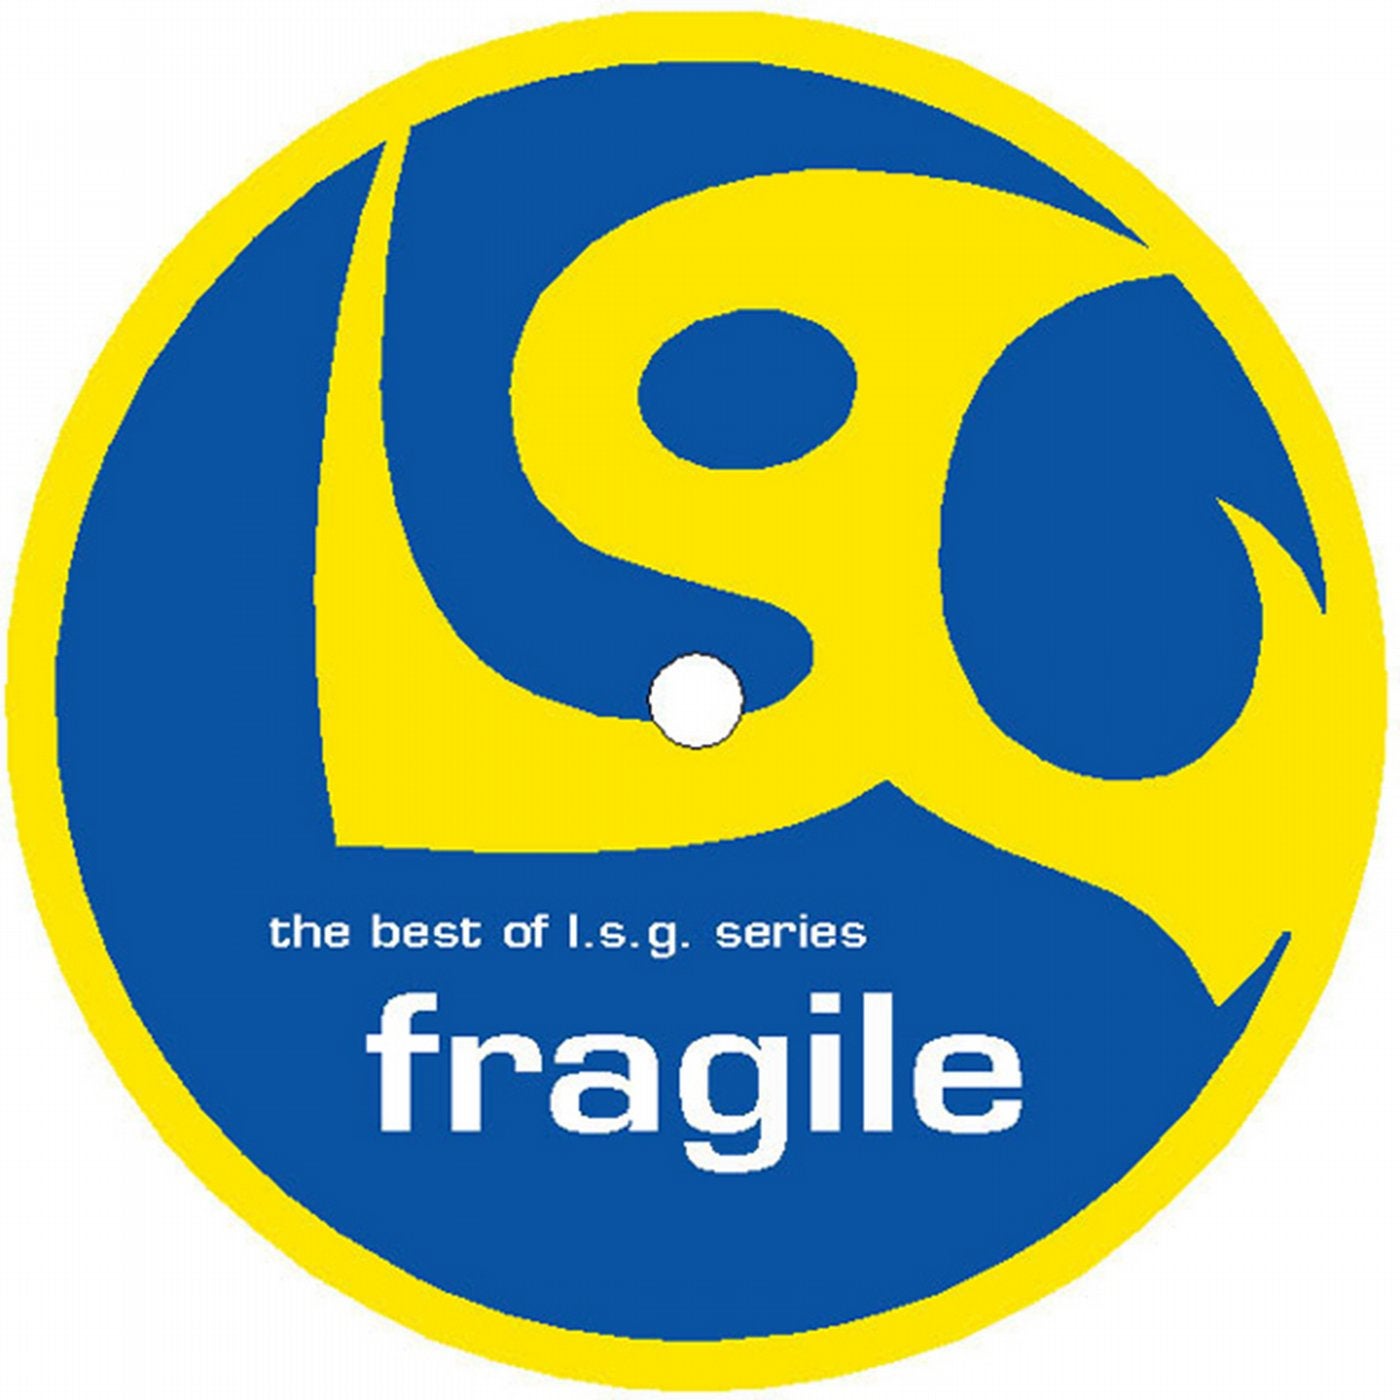 The Best Of L.S.G.: Fragile